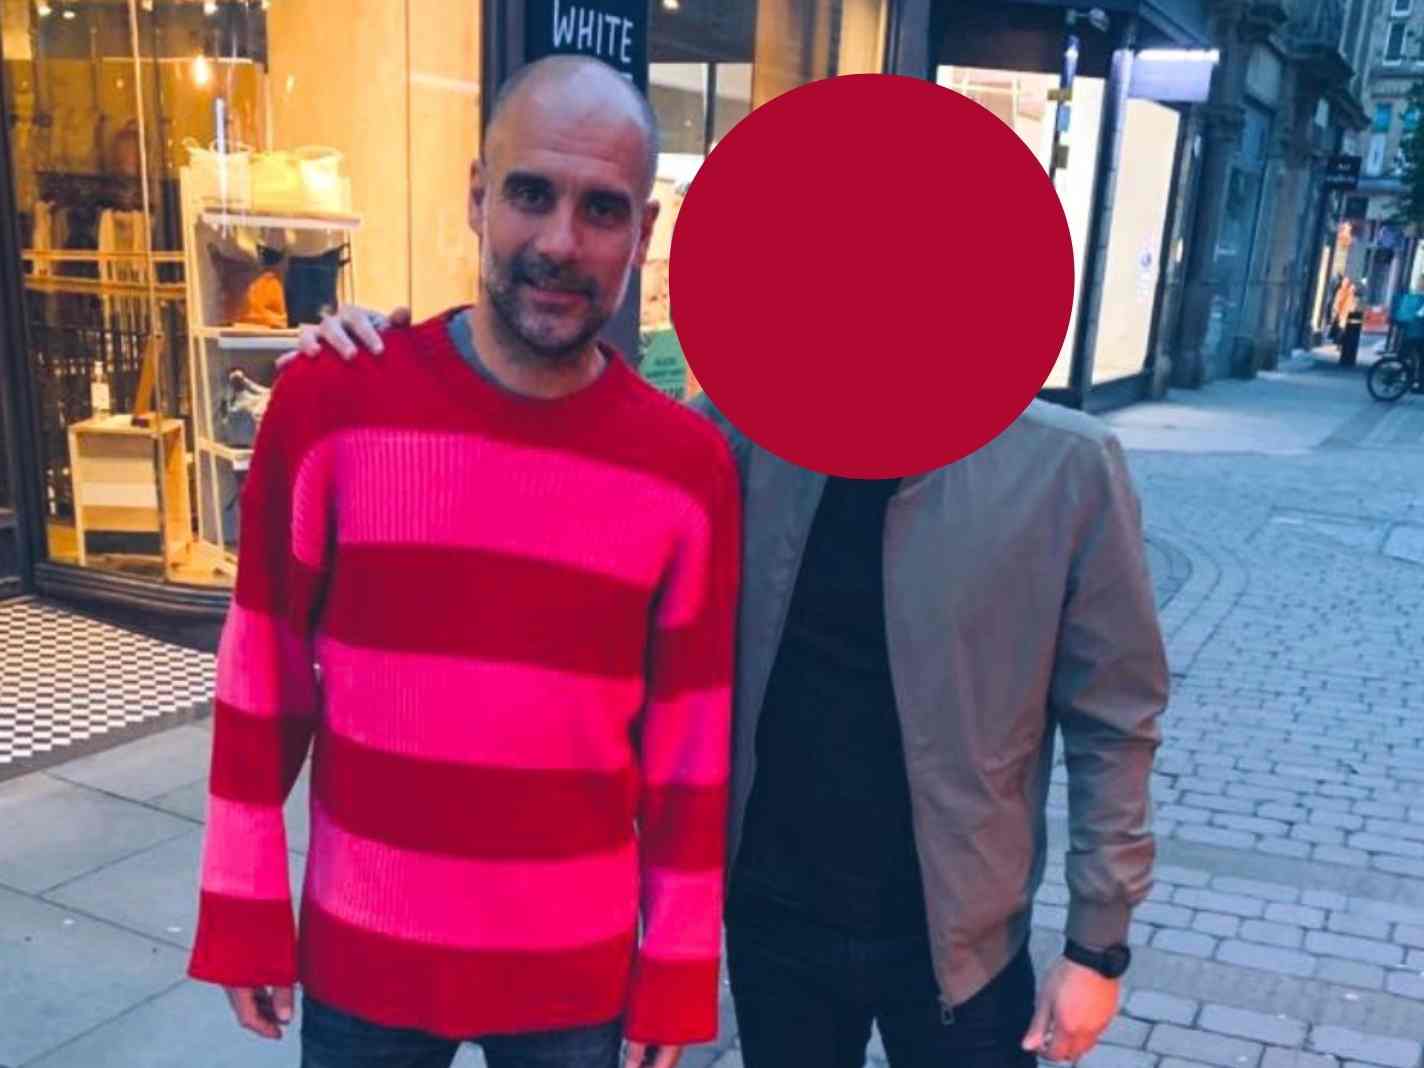 The image shows Pep Guardiola wearing a bright pinkred Balenciaga sweater and getting a picture take with a fan, whose face is blurred.